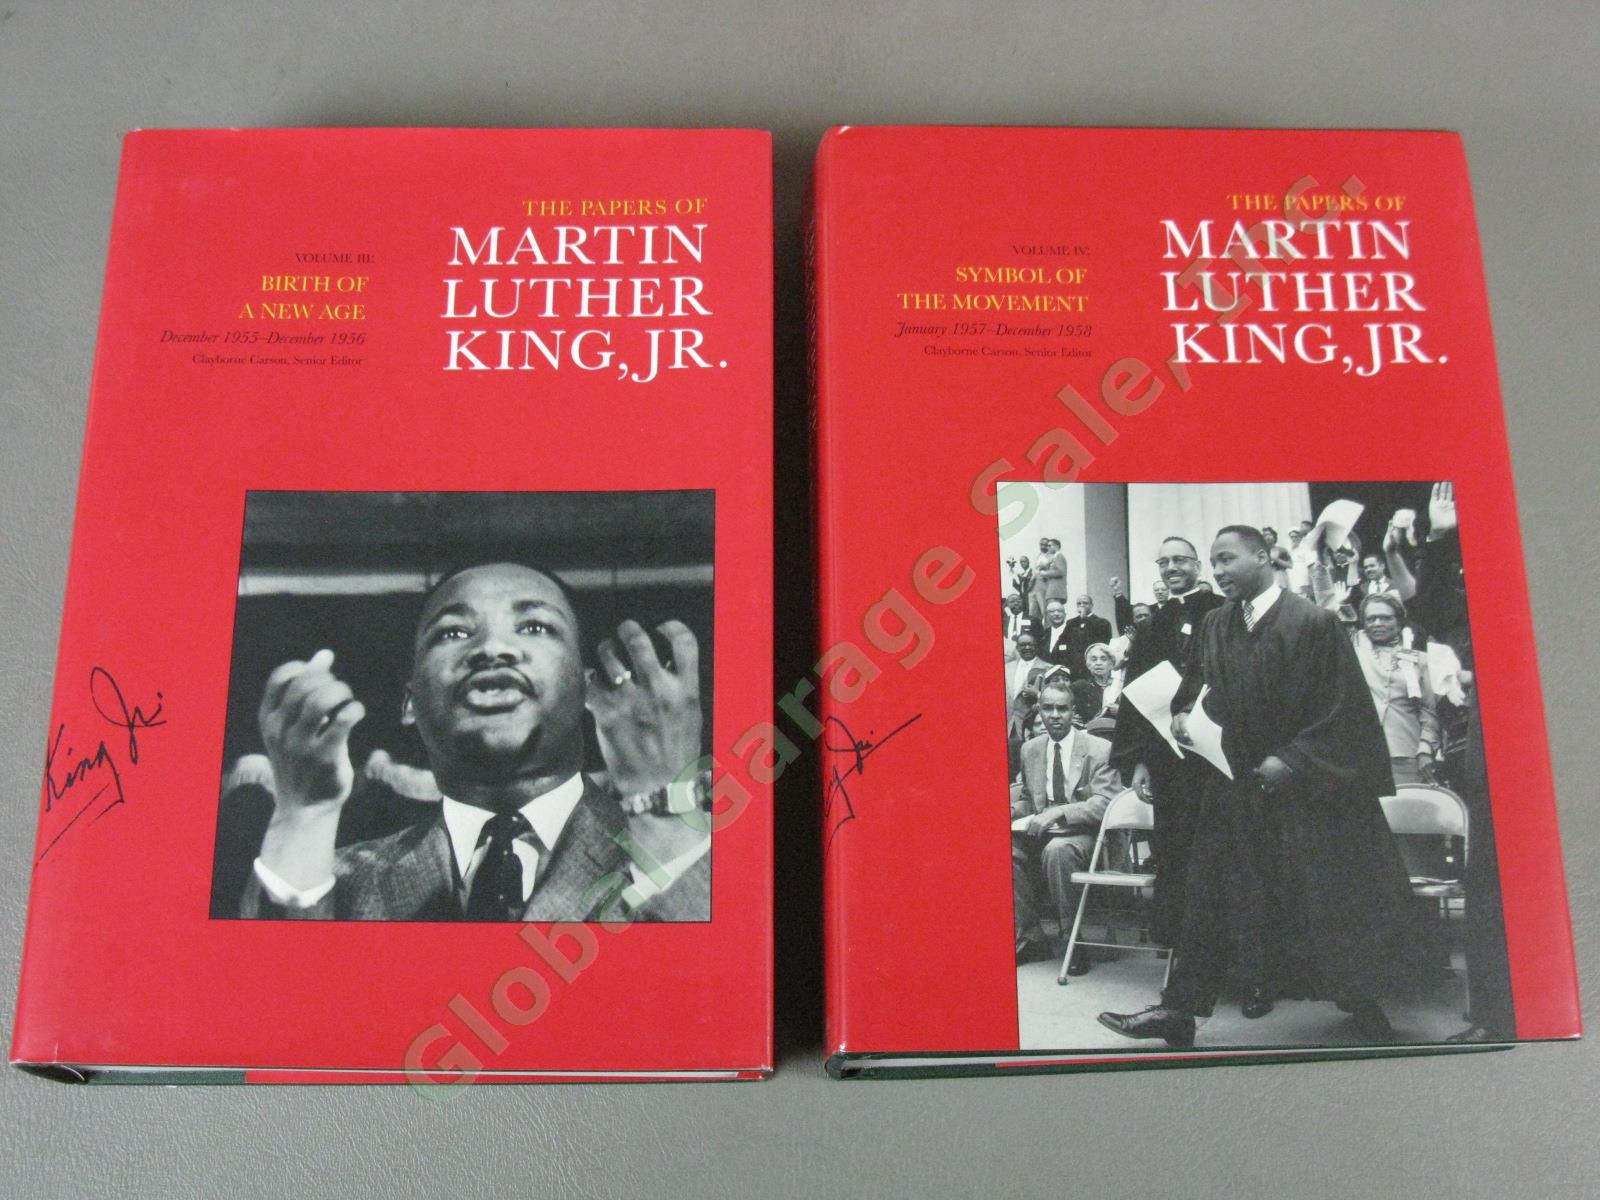 MINT! Never Read! Papers of Martin Luther King Jr Volumes I-VII Rare Full Set! 5